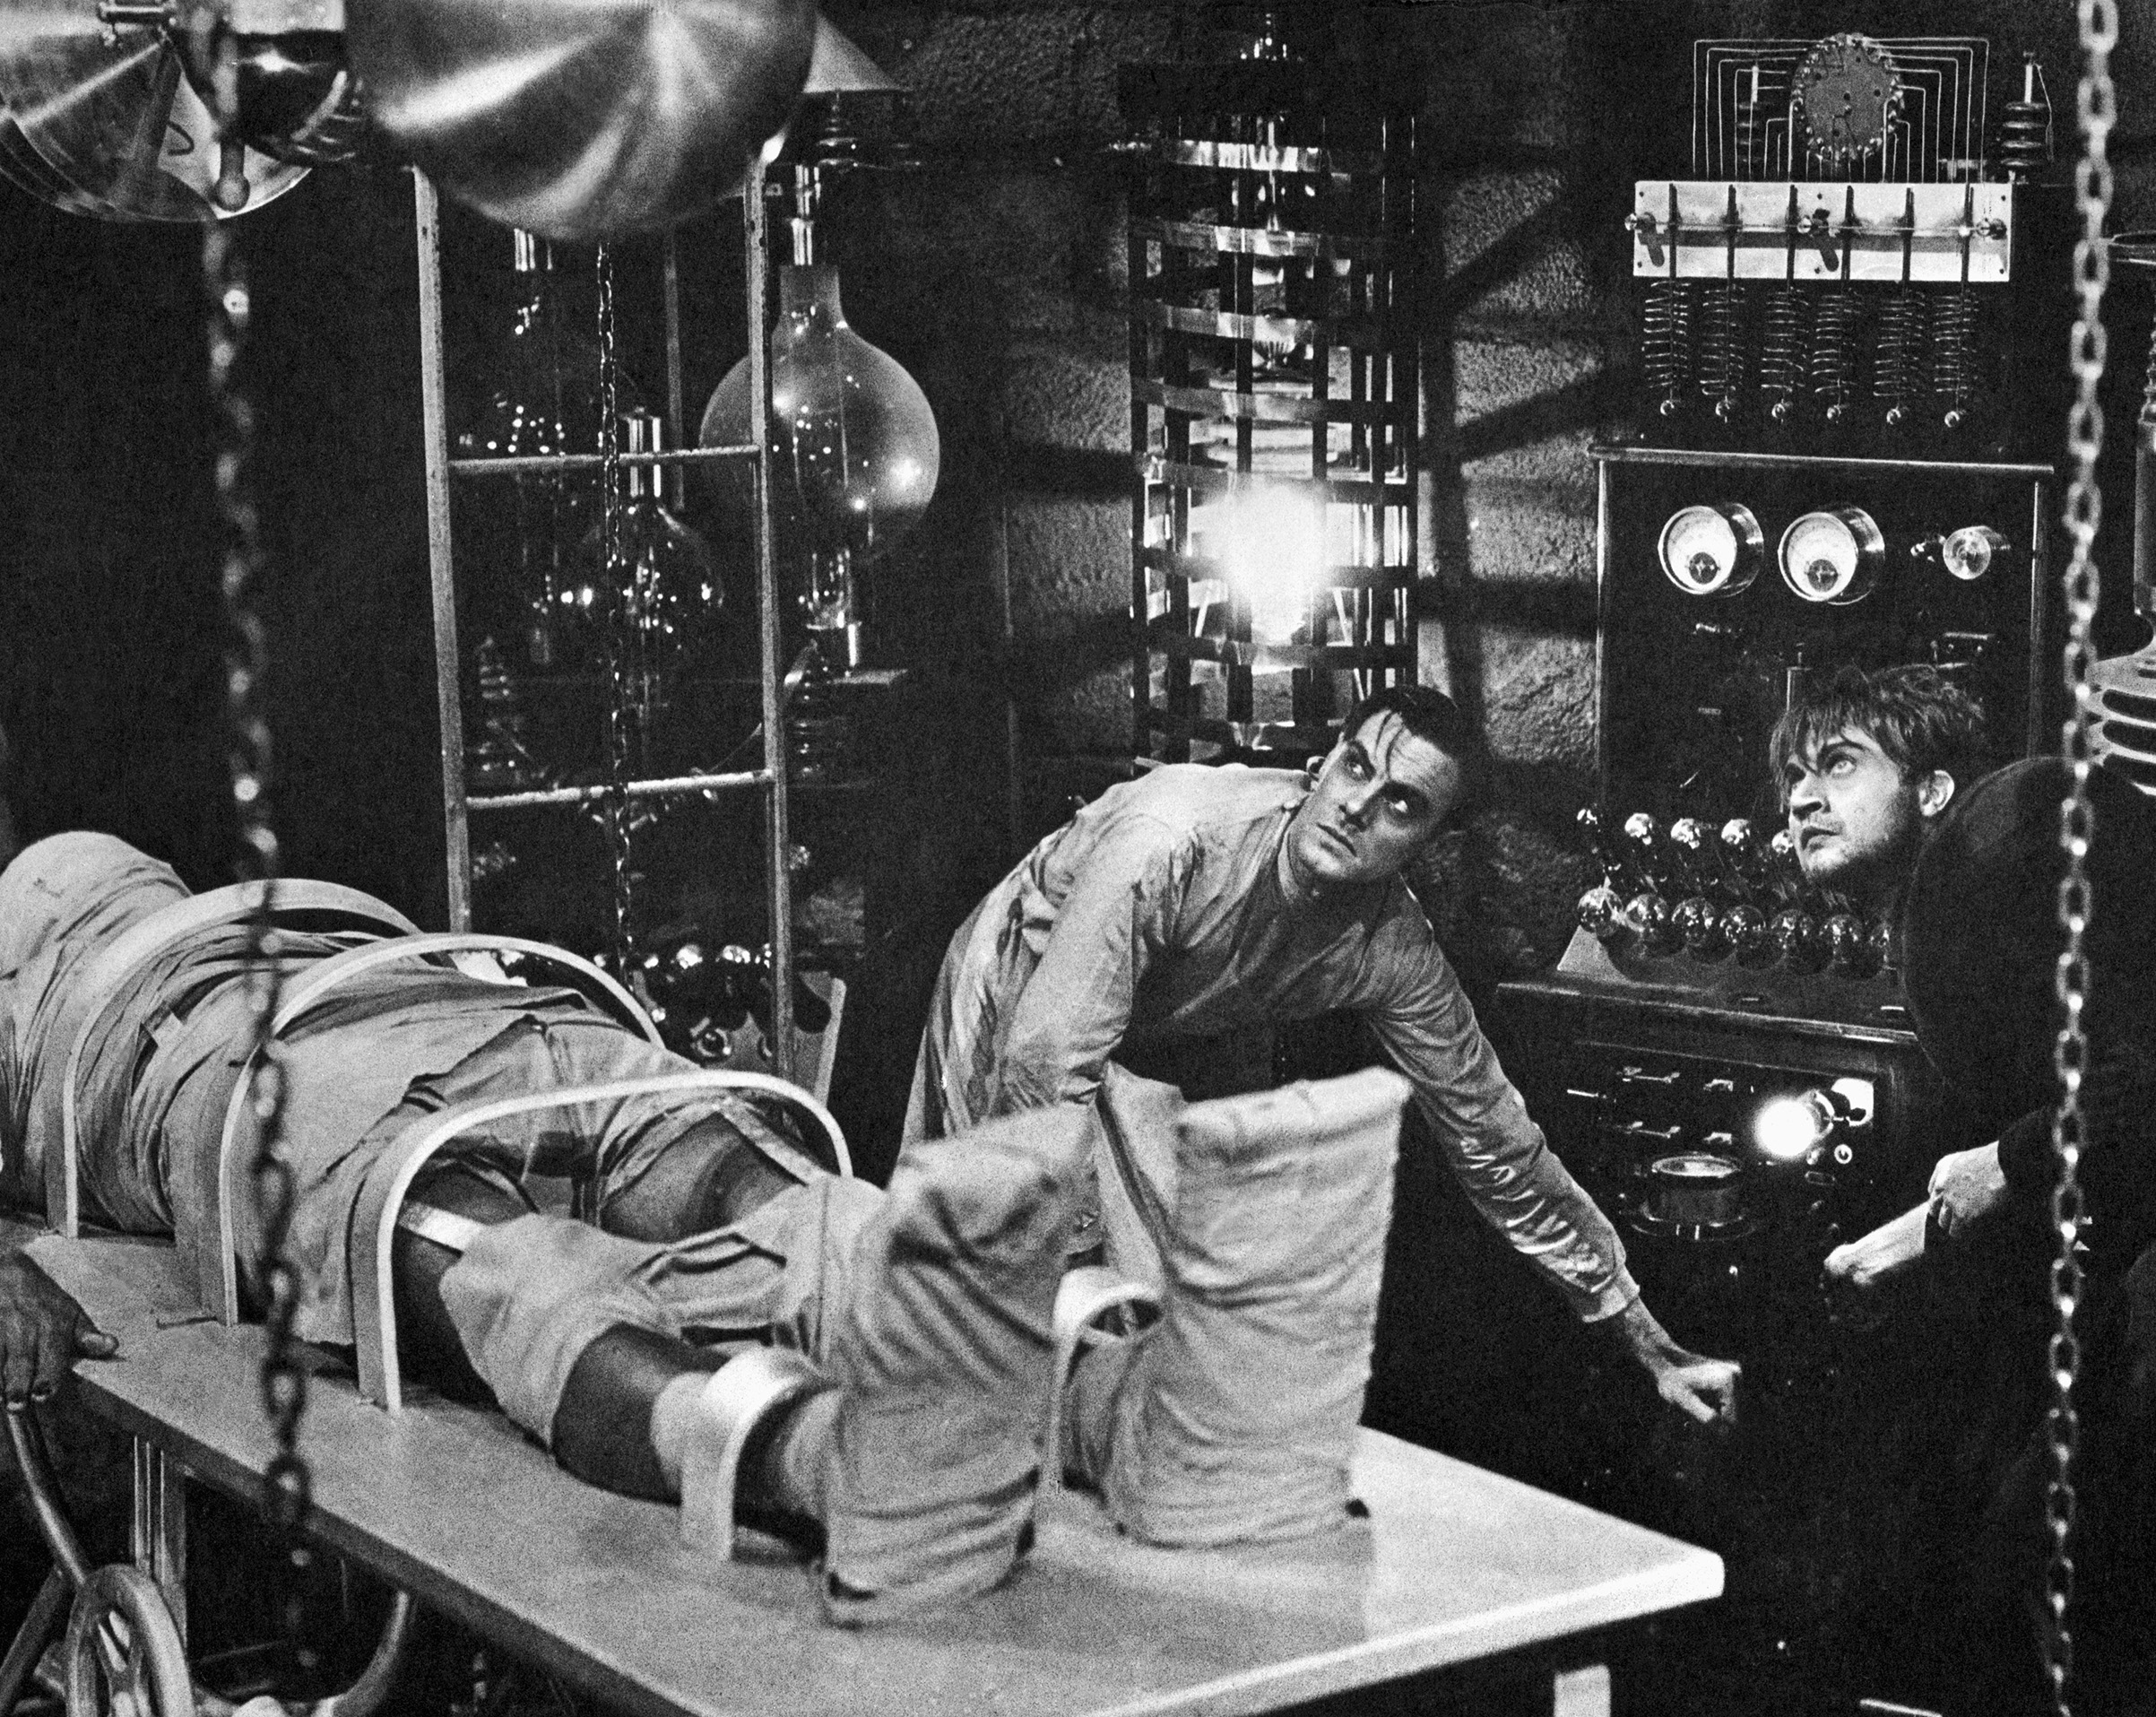 Colin Clive, as Dr. Frankenstein, and Dwight Frye, as his assistant Fritz, prepare to bring their monster to life in a scene from the 1931 movie version of Mary Shelley's Frankenstein. (Bettmann Archive/Getty Images)